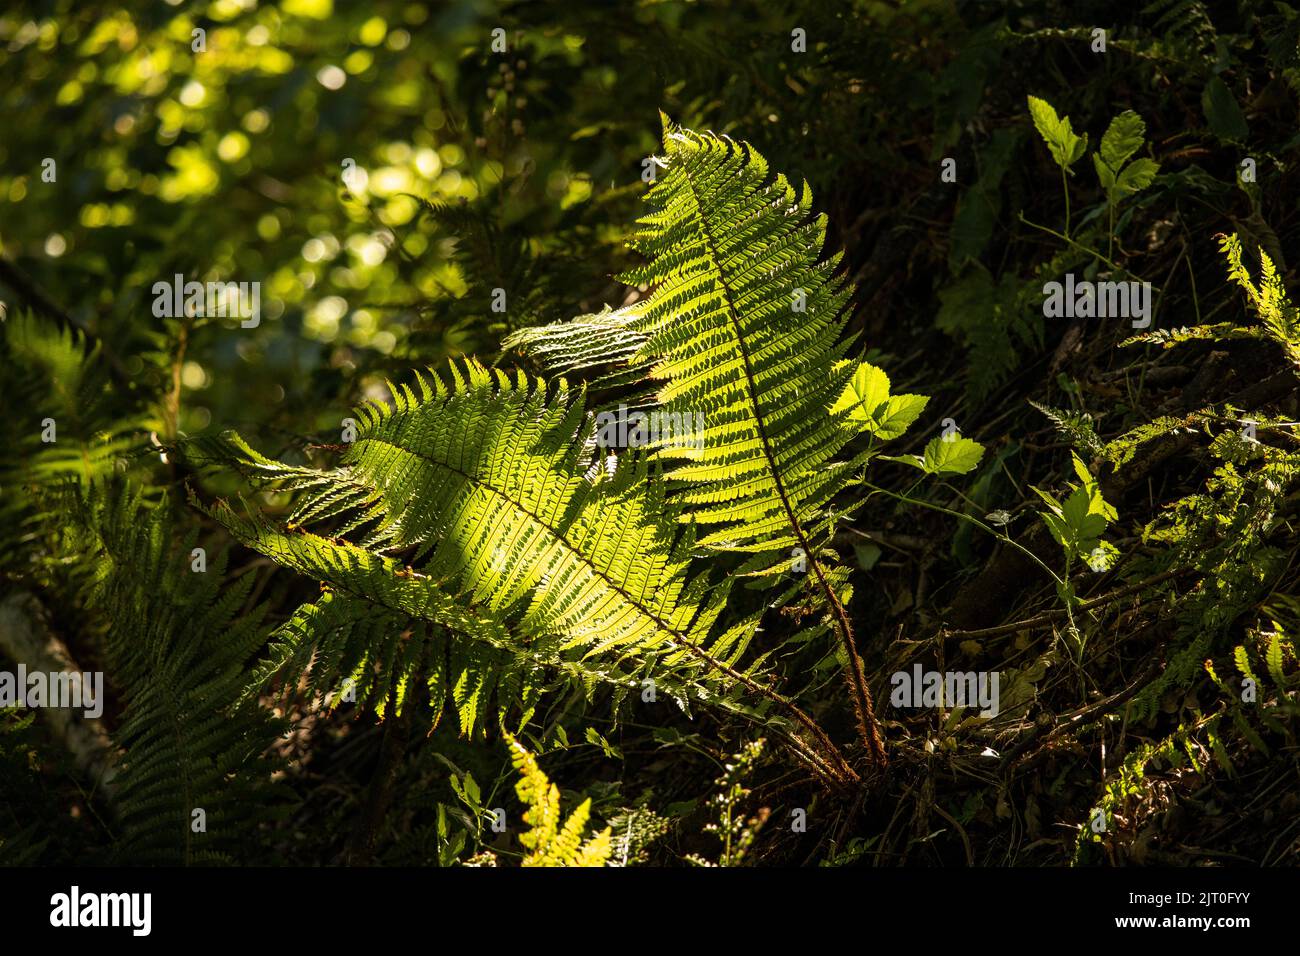 Bracken is a primitive fern dating back to the Devonian Period. It can thrive on forest floors that only receive patchy sunlight. Stock Photo